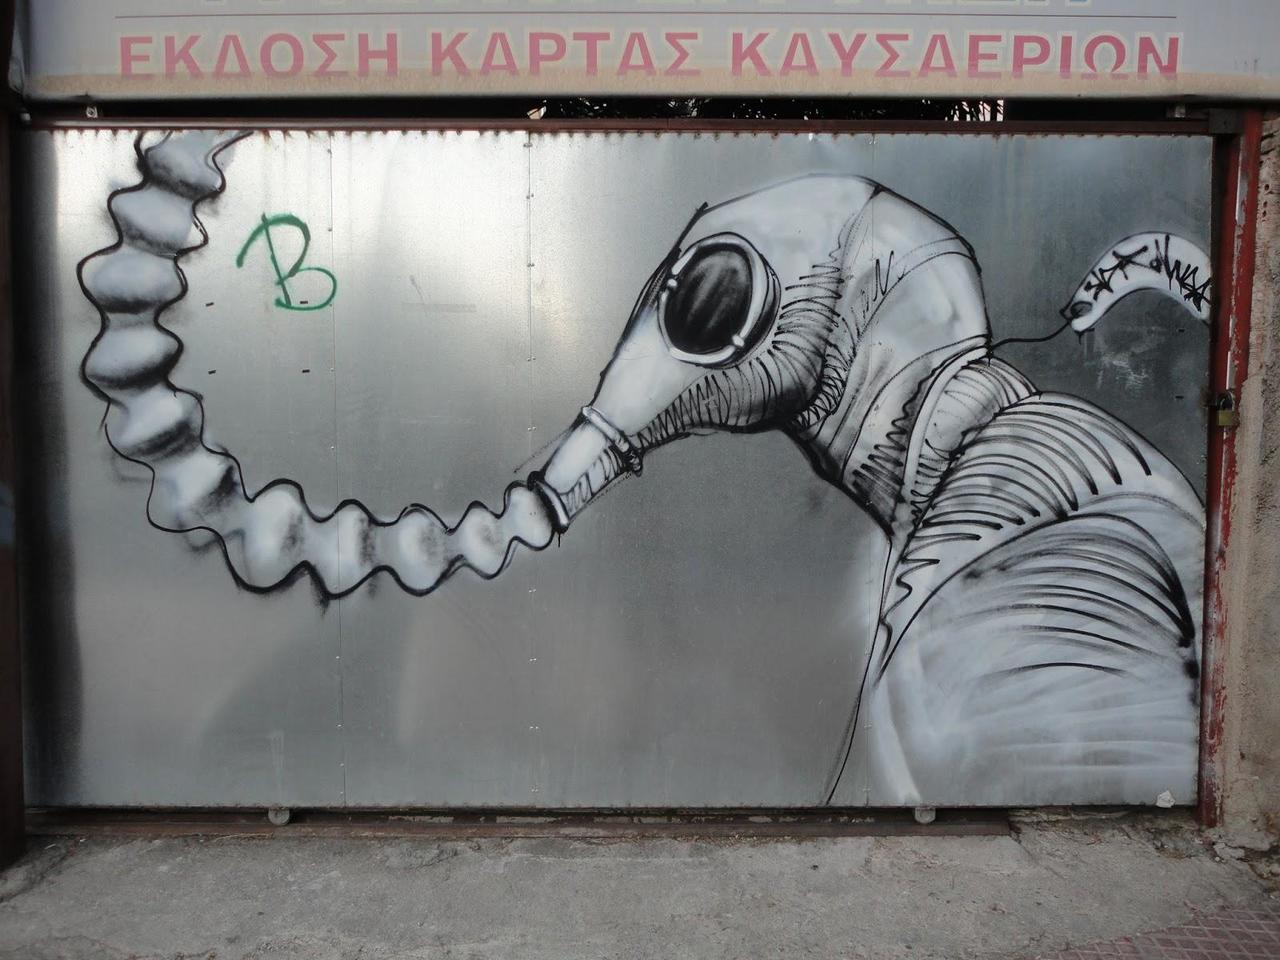 RT @culturalsynergy: Once upon a time in #Athens, #20 http://bit.ly/1KLEHGu #streetart #graffiti #mural #antireport http://t.co/AavZ0raLhe